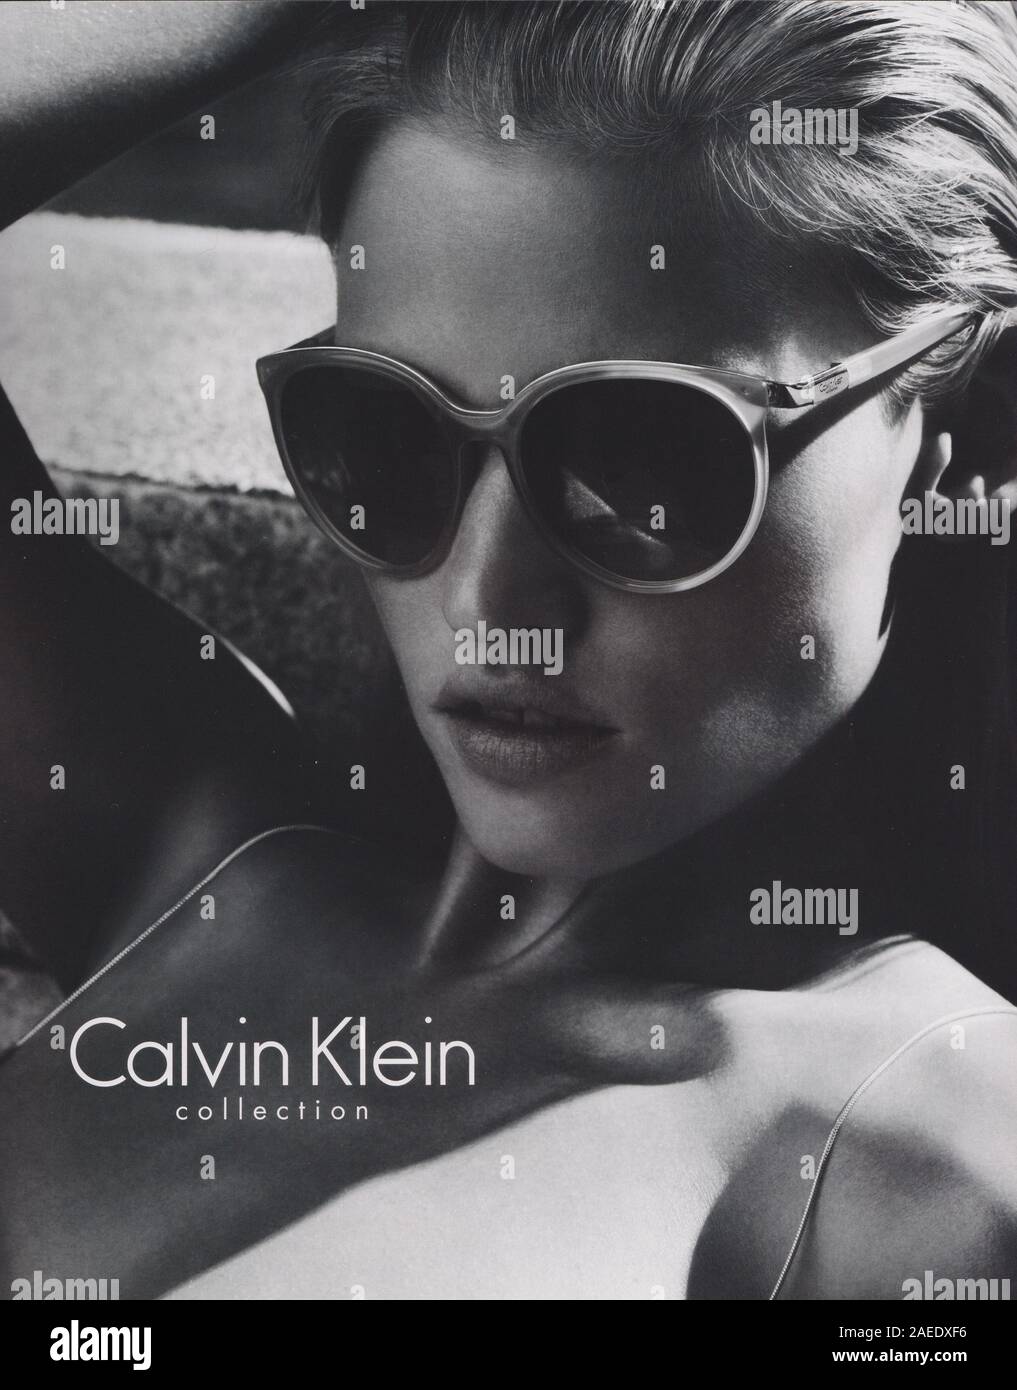 poster advertising Calvin Klein fashion house with Lara Stone in paper magazine from 2012 year, CK advertisement, creative Calvin Klein advert Stock Photo